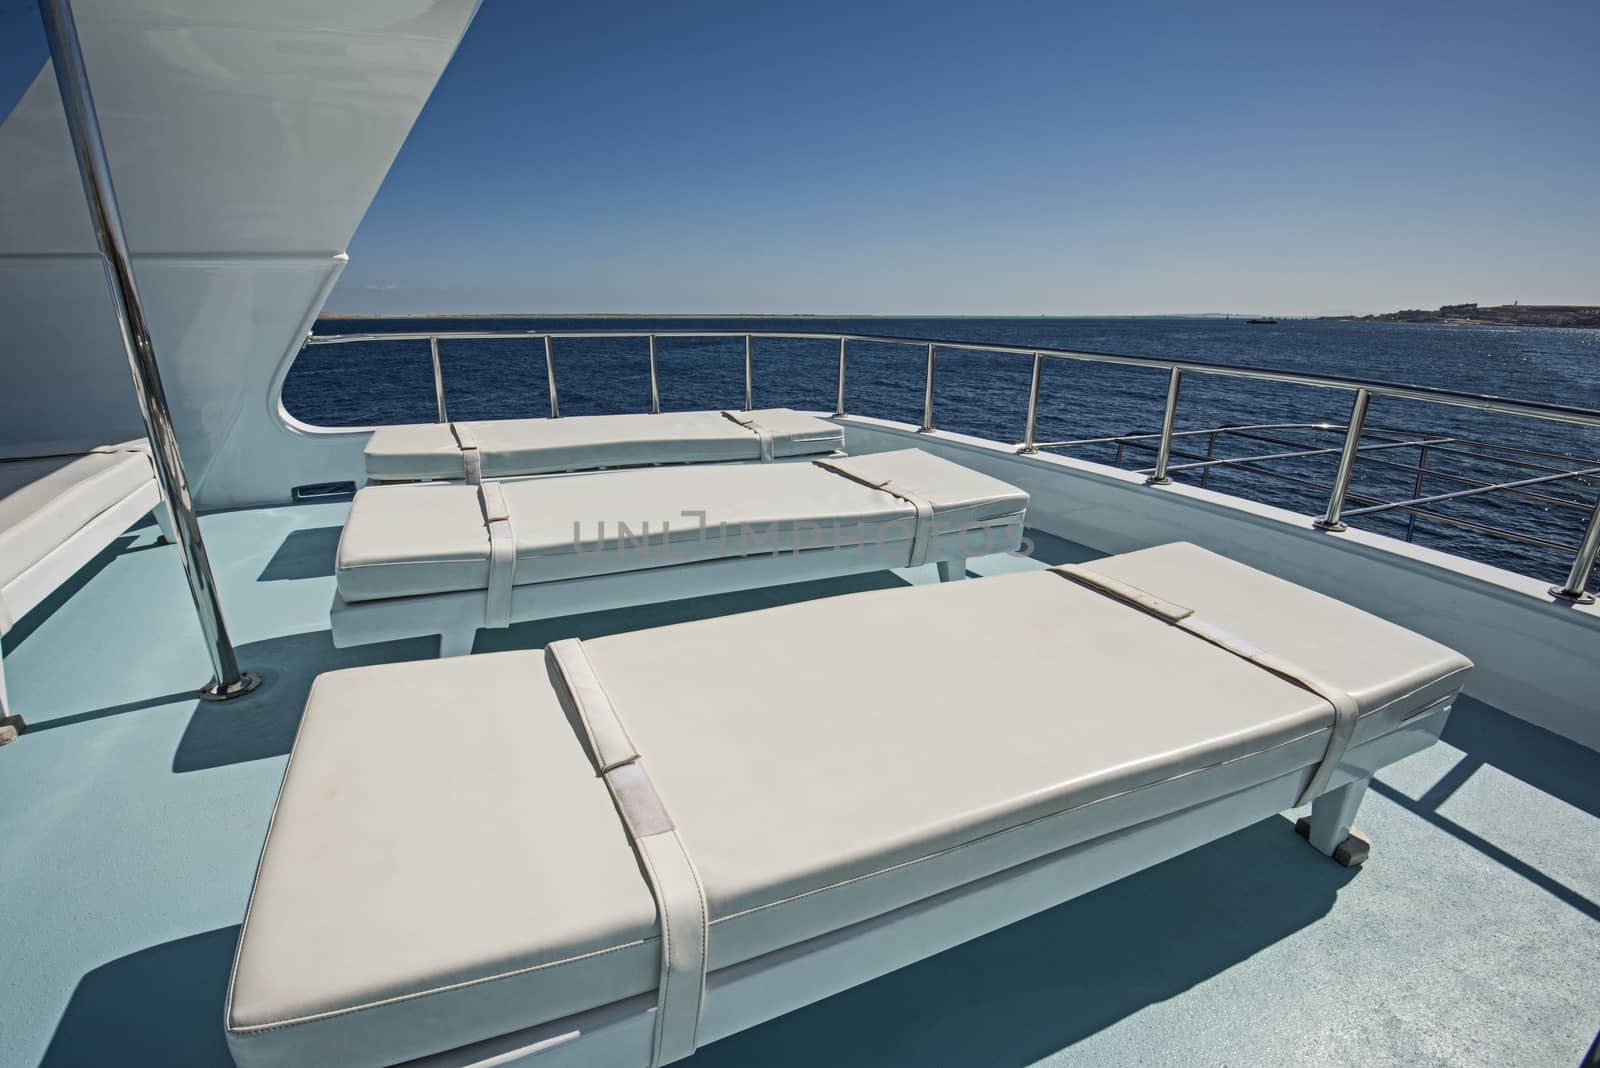 View over the sundeck of a large luxury motor yacht by paulvinten